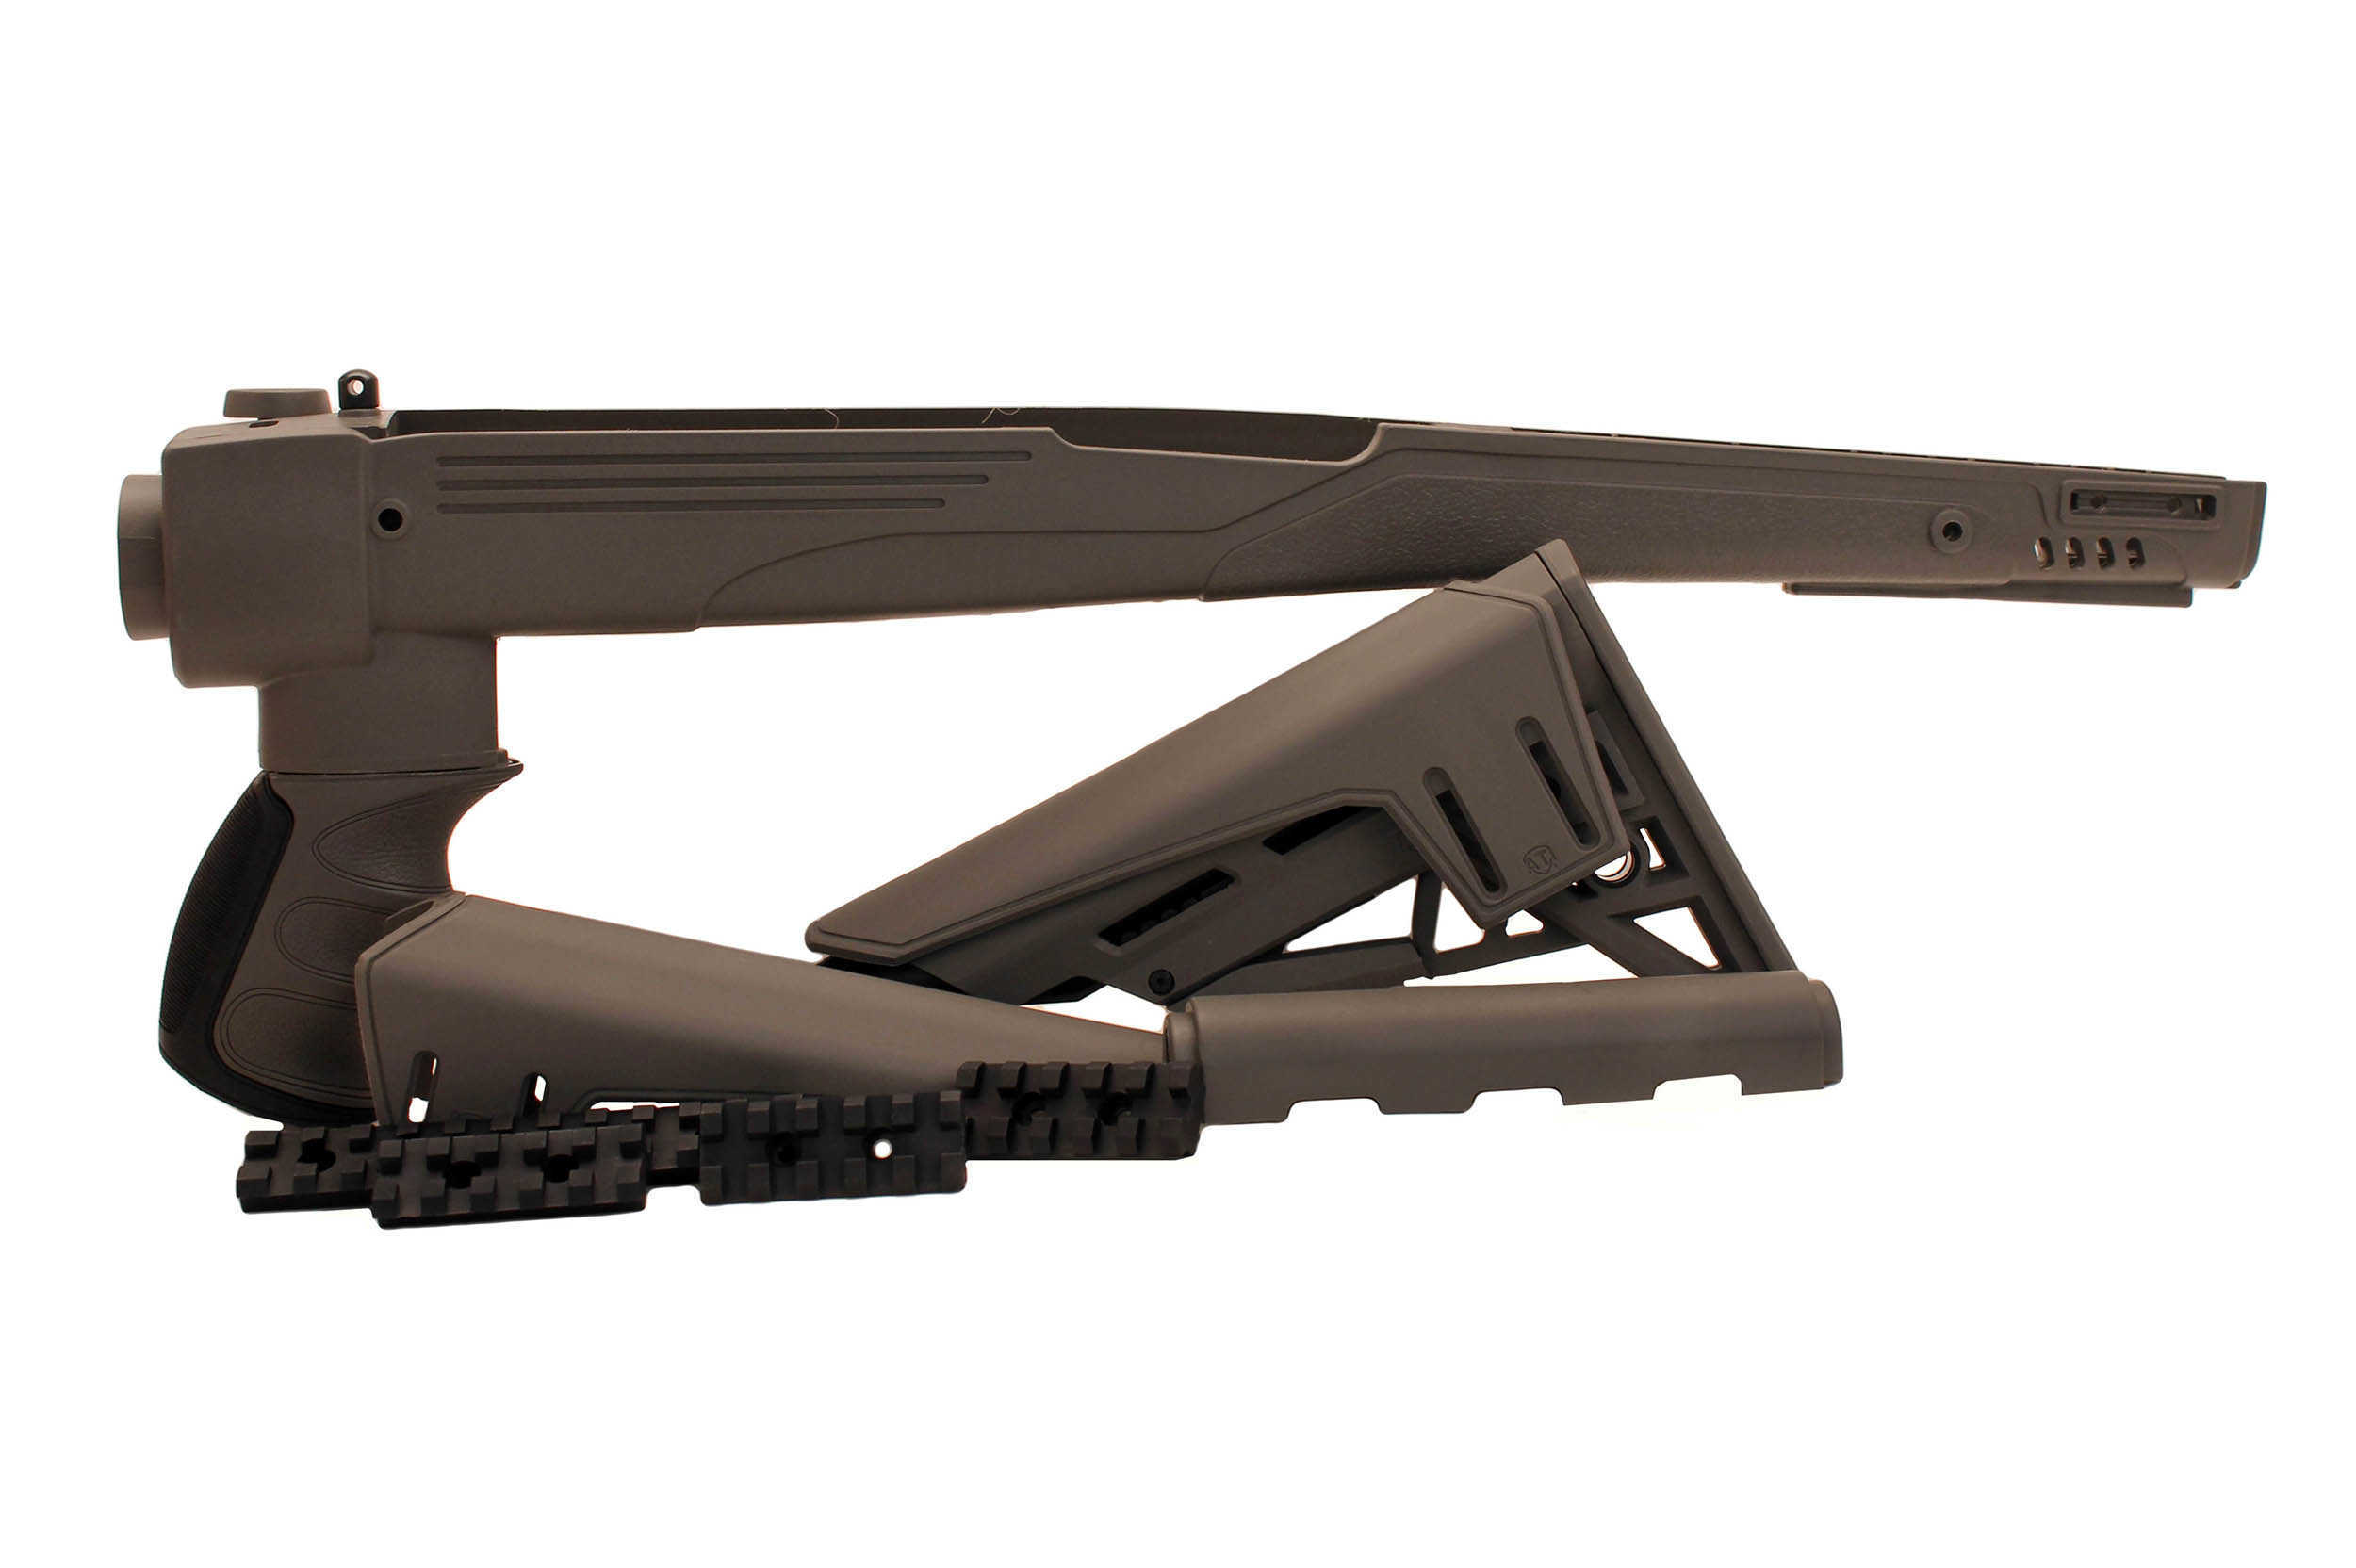 ATI SKS Tactlite Adjustable 6 Position Side Folding Stock With Scorpion Recoil System Destroyer Grey